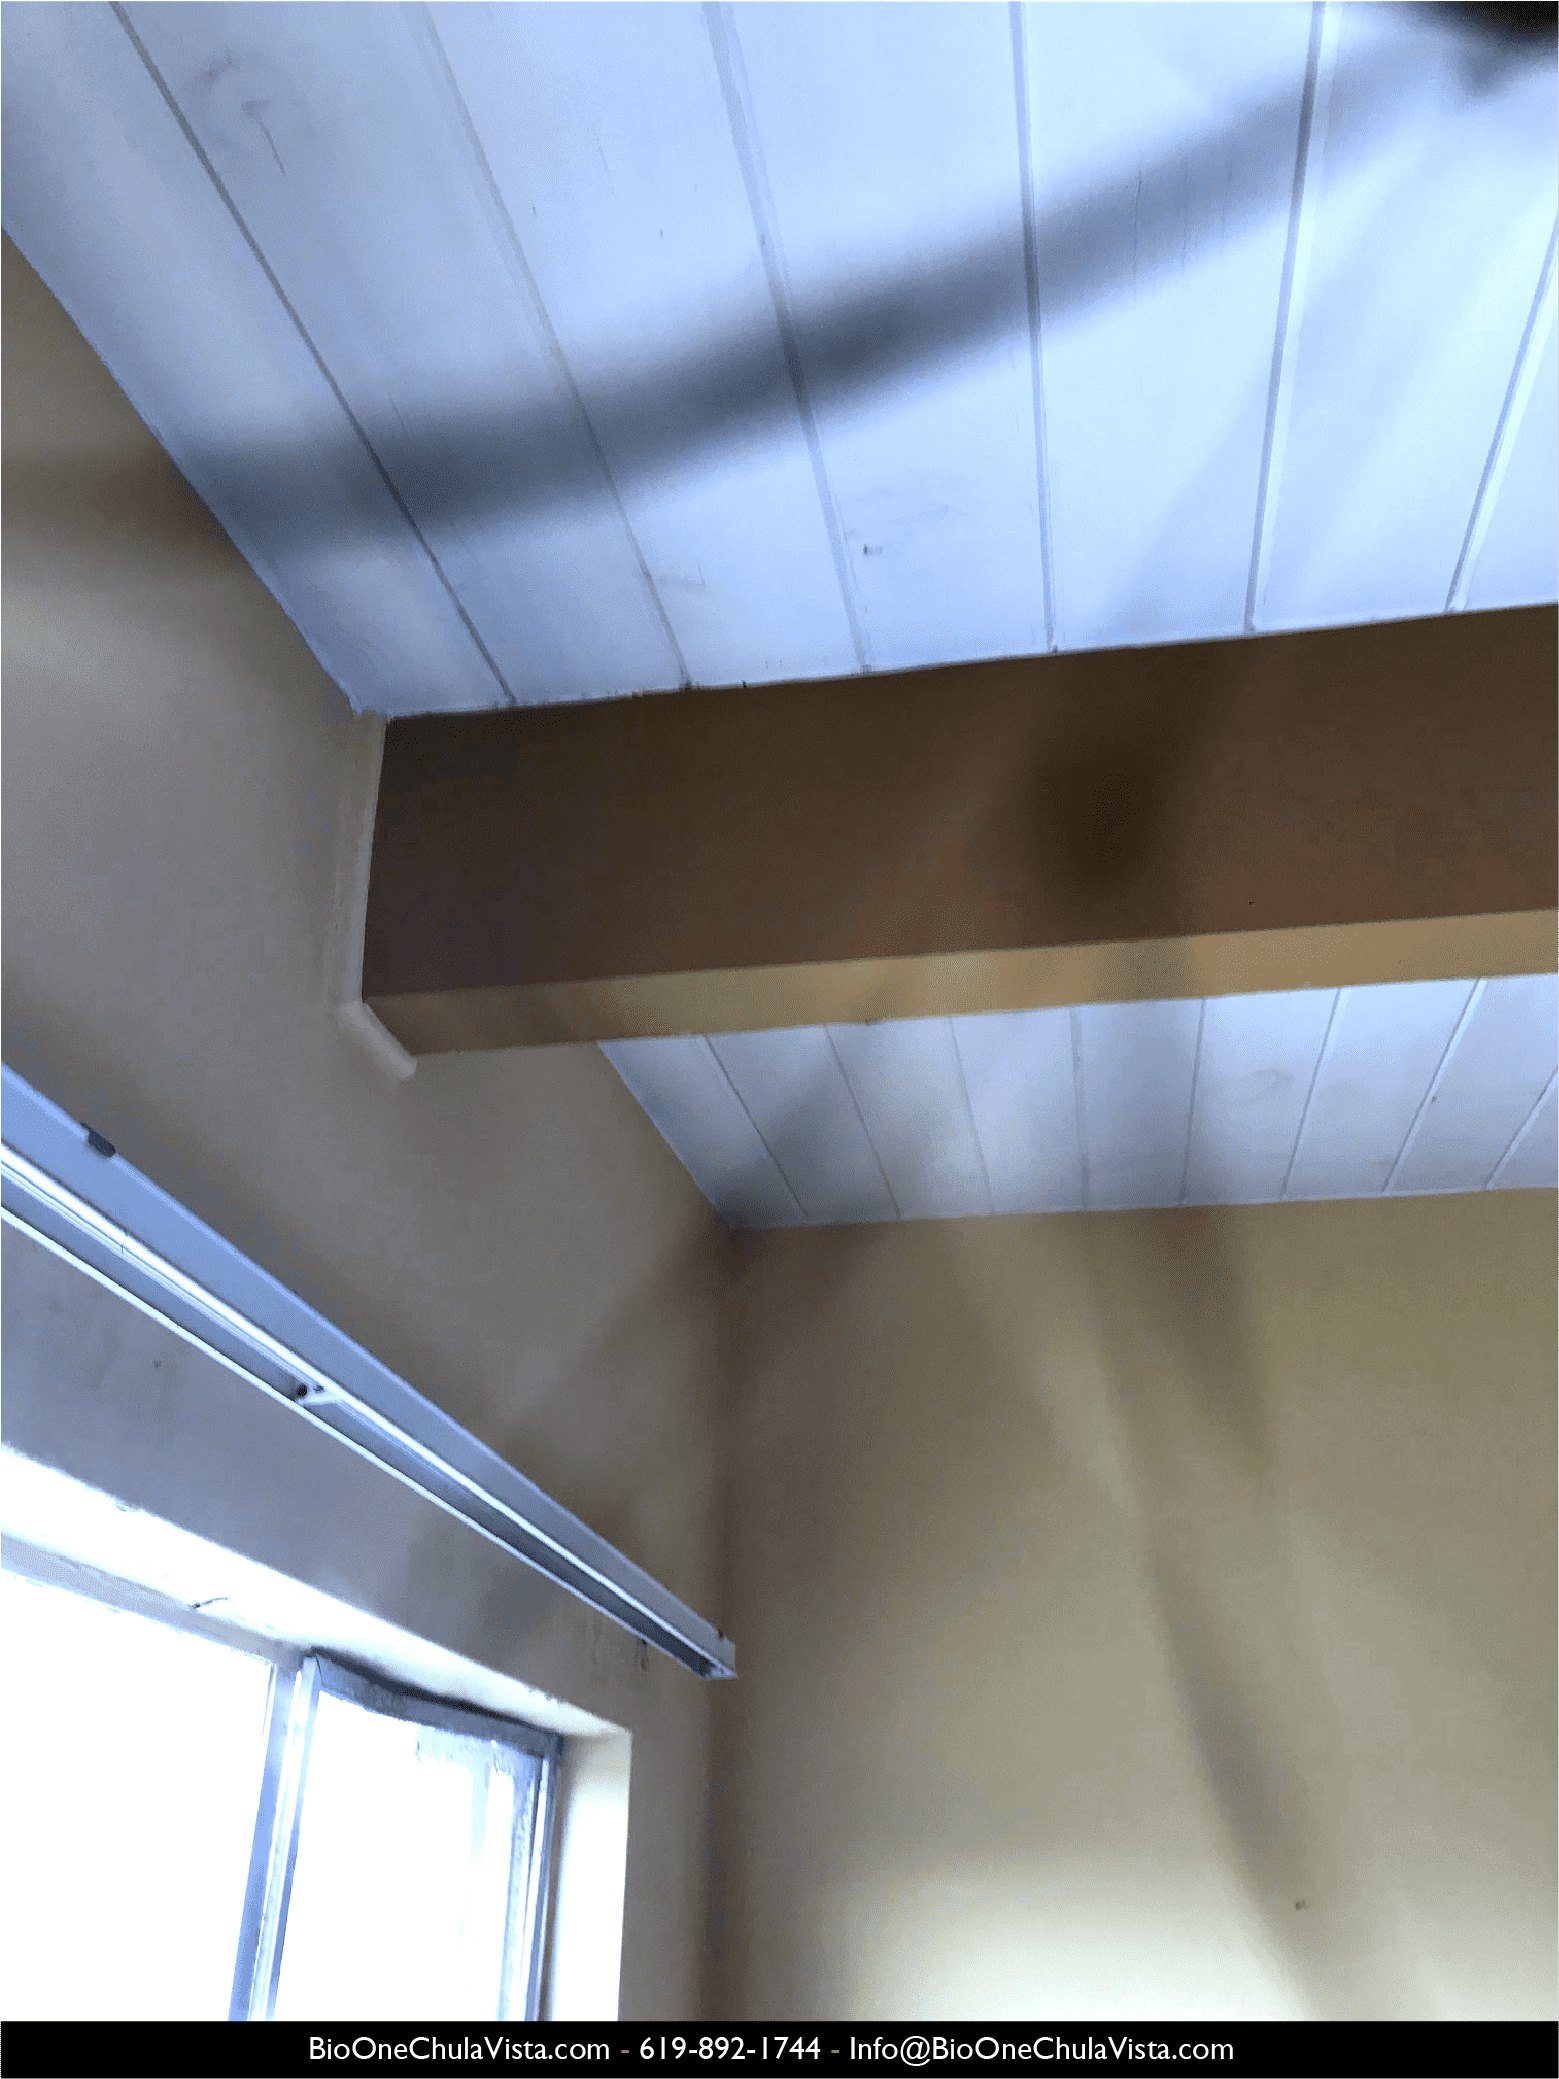 Images shows clean ceiling after Bio-One specialists removed black mold from it.